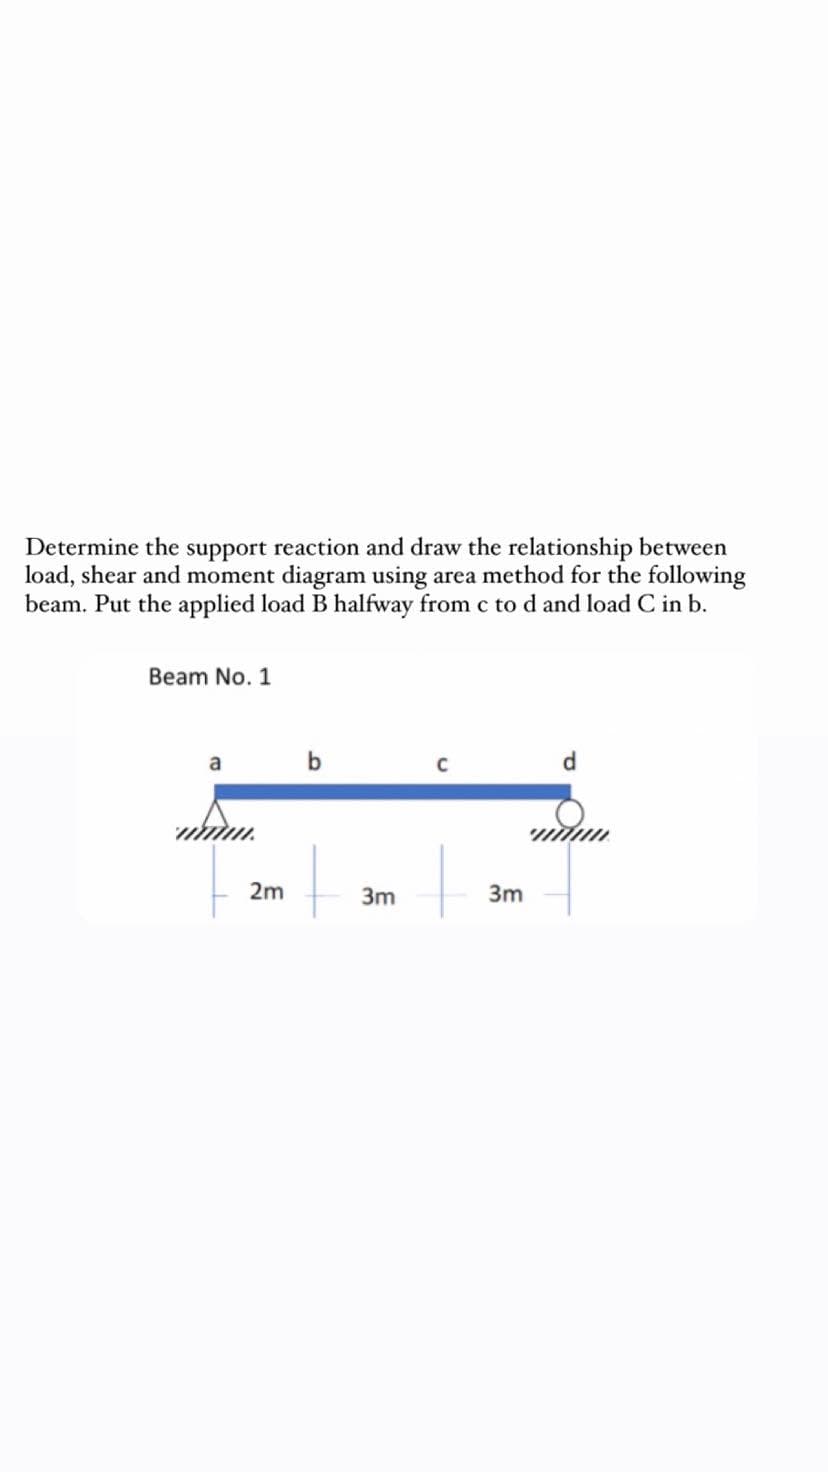 Determine the support reaction and draw the relationship between
load, shear and moment diagram using area method for the following
beam. Put the applied load B halfway from c to d and load C in b.
Beam No. 1
a
www.
2m
b
3m
C
3m
d
www.